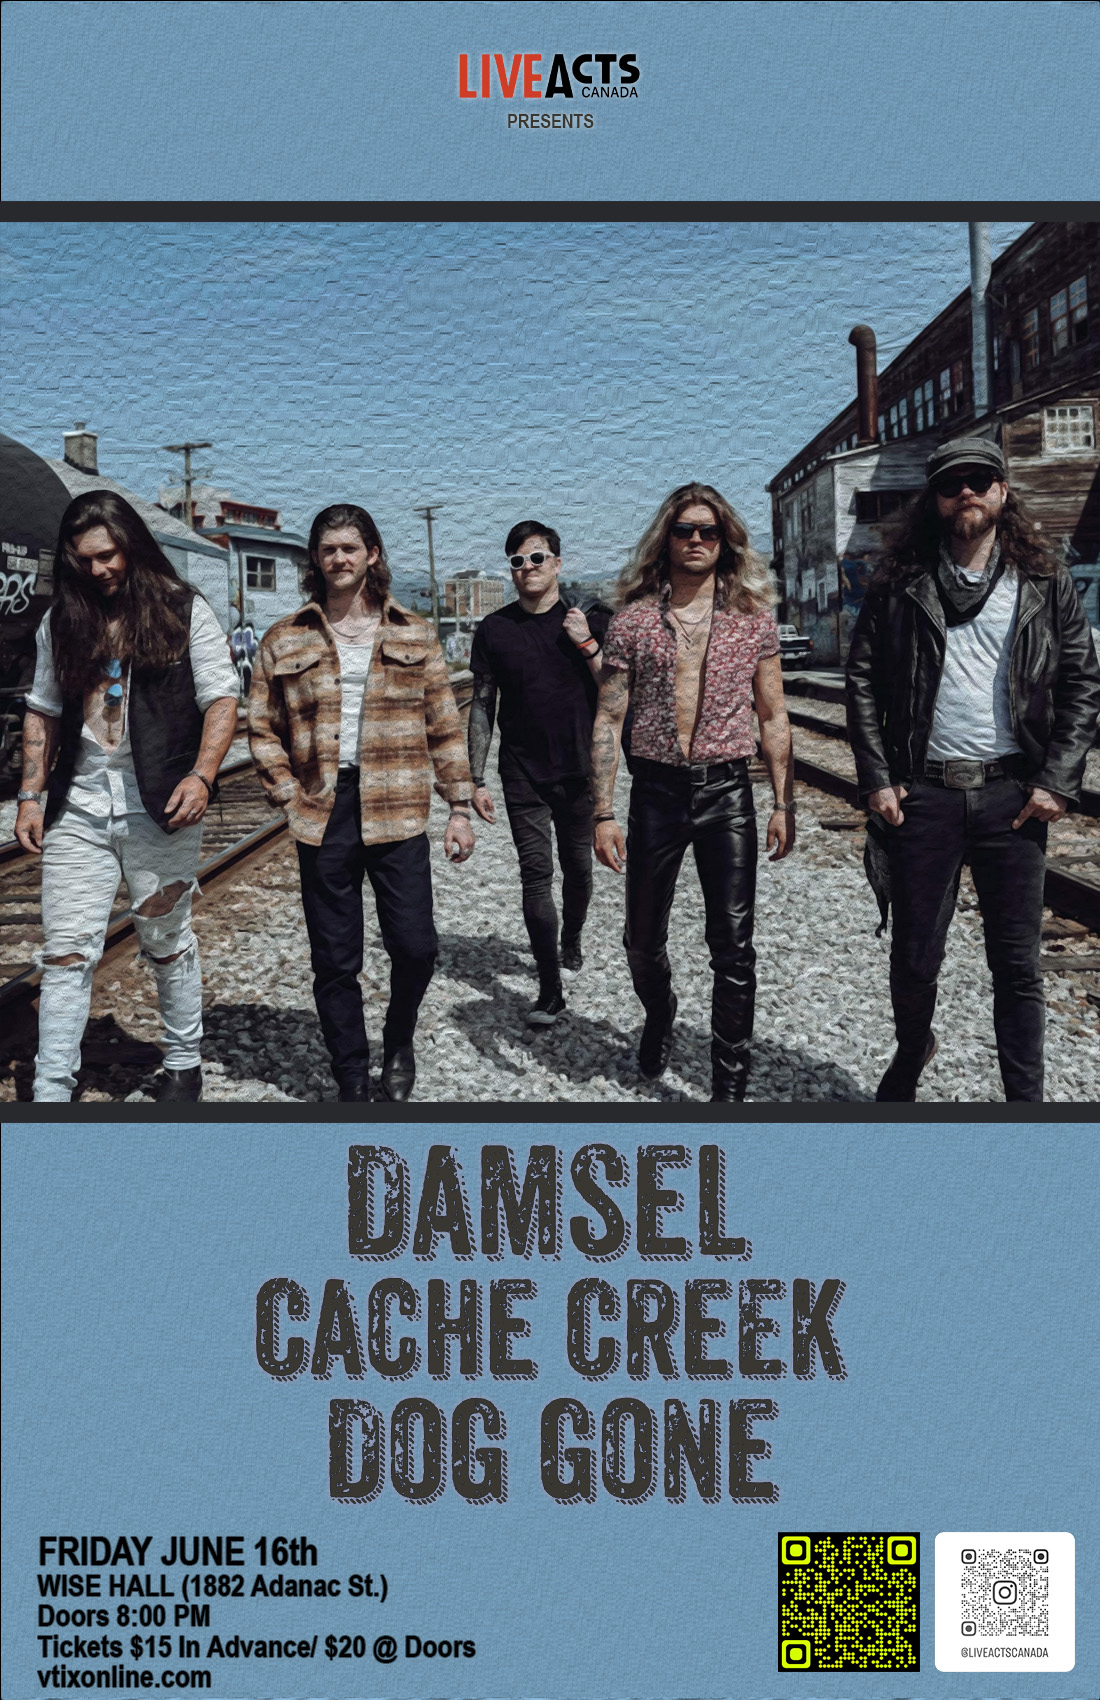 Damsel with Special Guests Cache Creek and Dog Gone